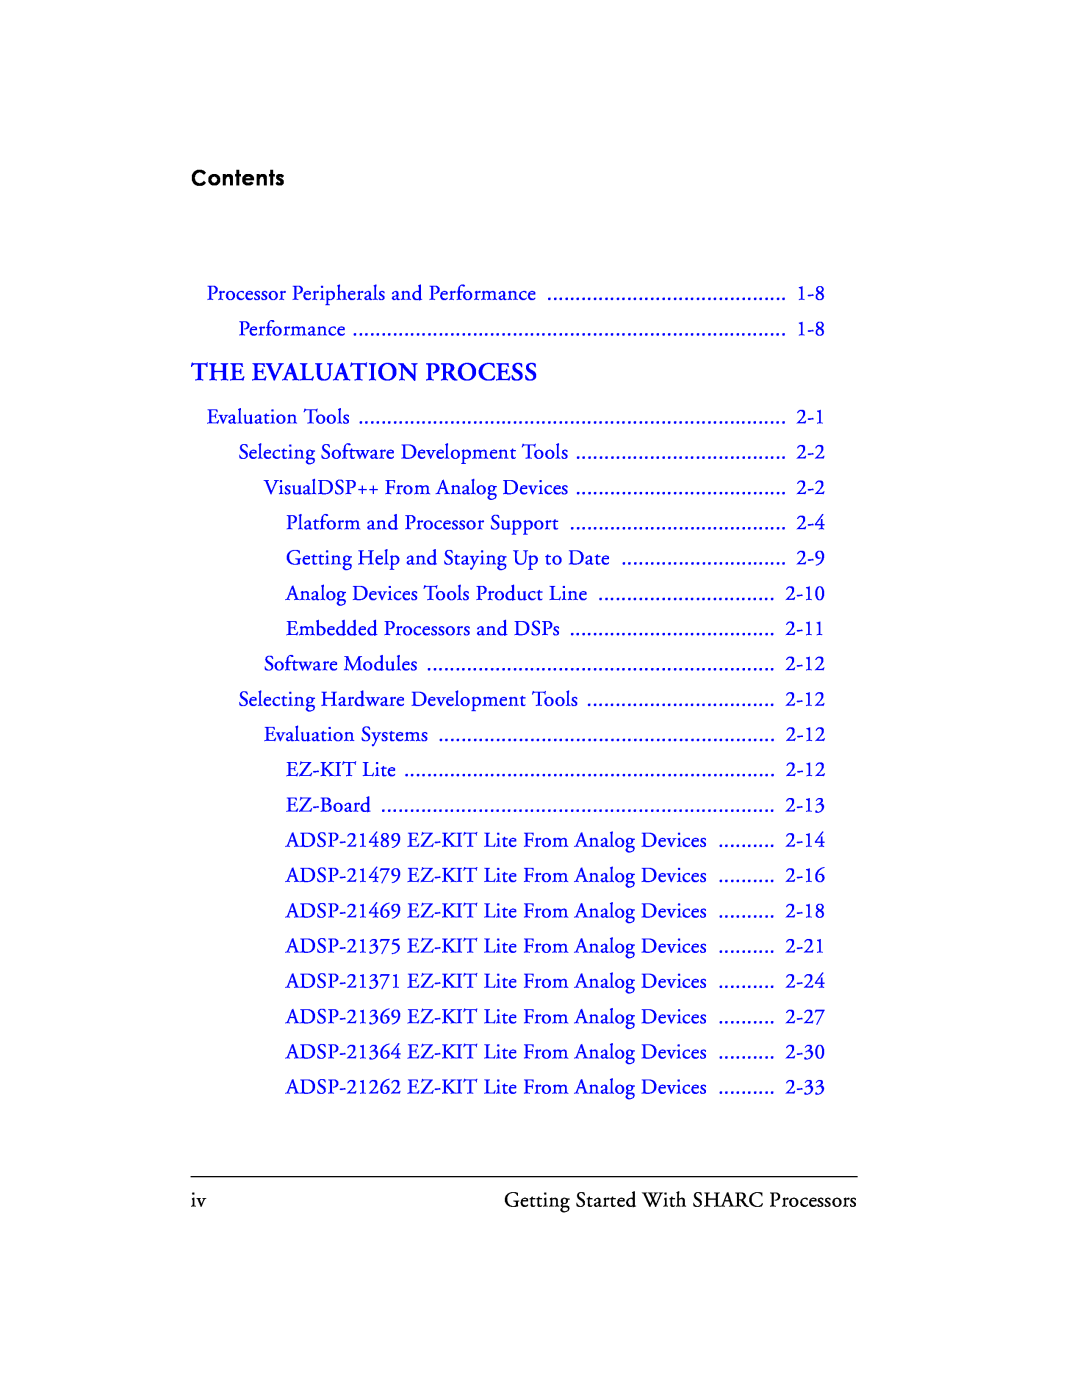 Analog Devices 82-003536-01 manual Contents, The Evaluation Process 